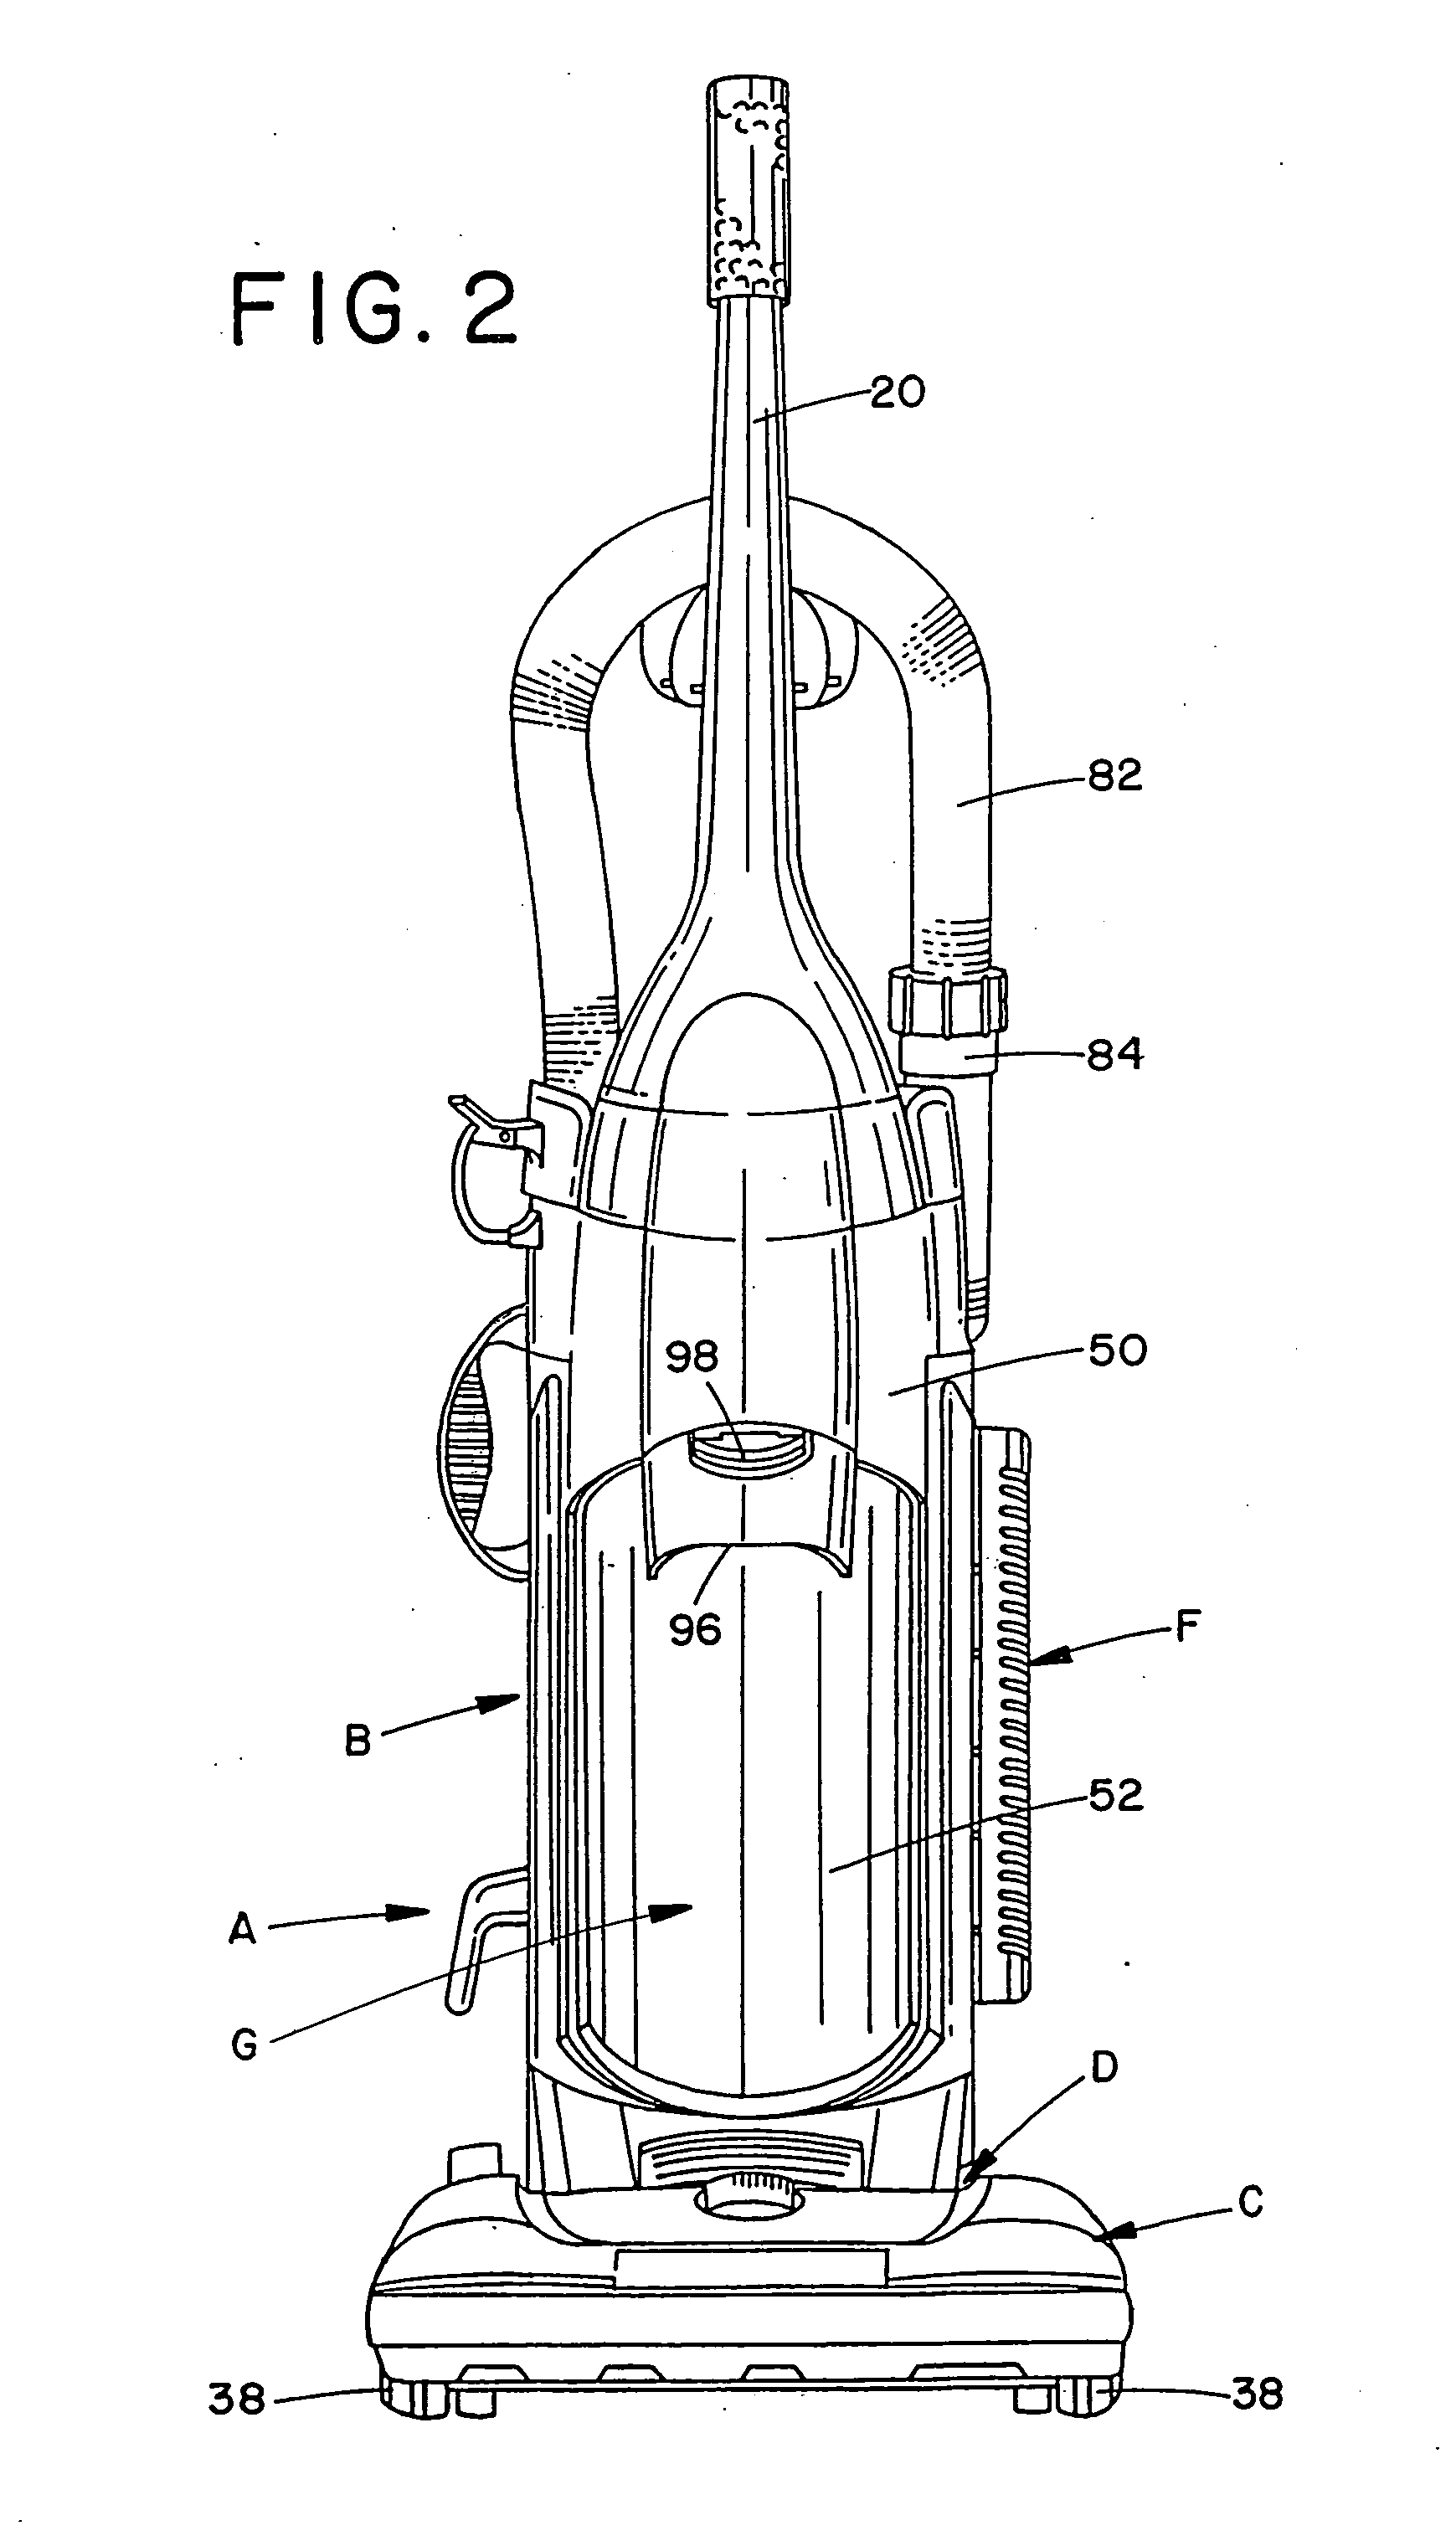 Upright vacuum cleaner with cyclonic airflow